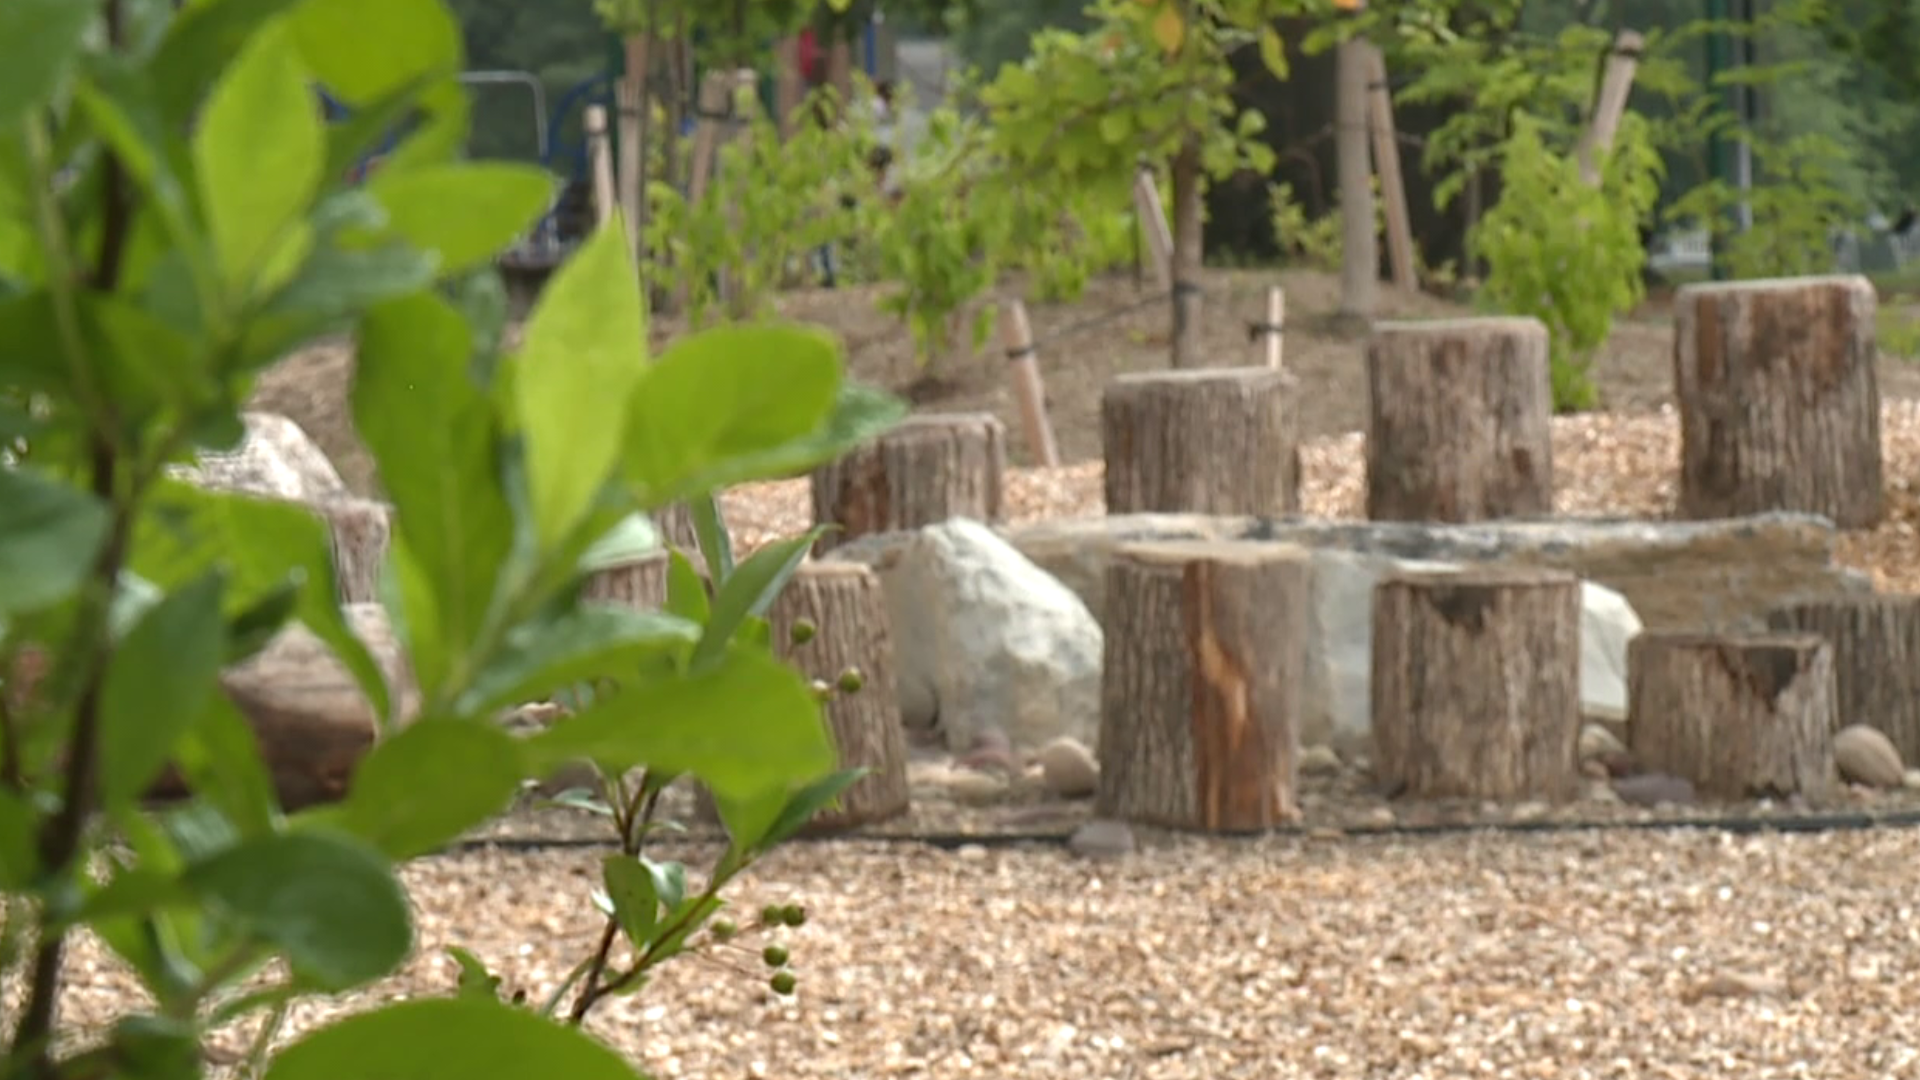 A natural play area in Williamsport opened up earlier this year but because of the ongoing pandemic, not many people know about it.